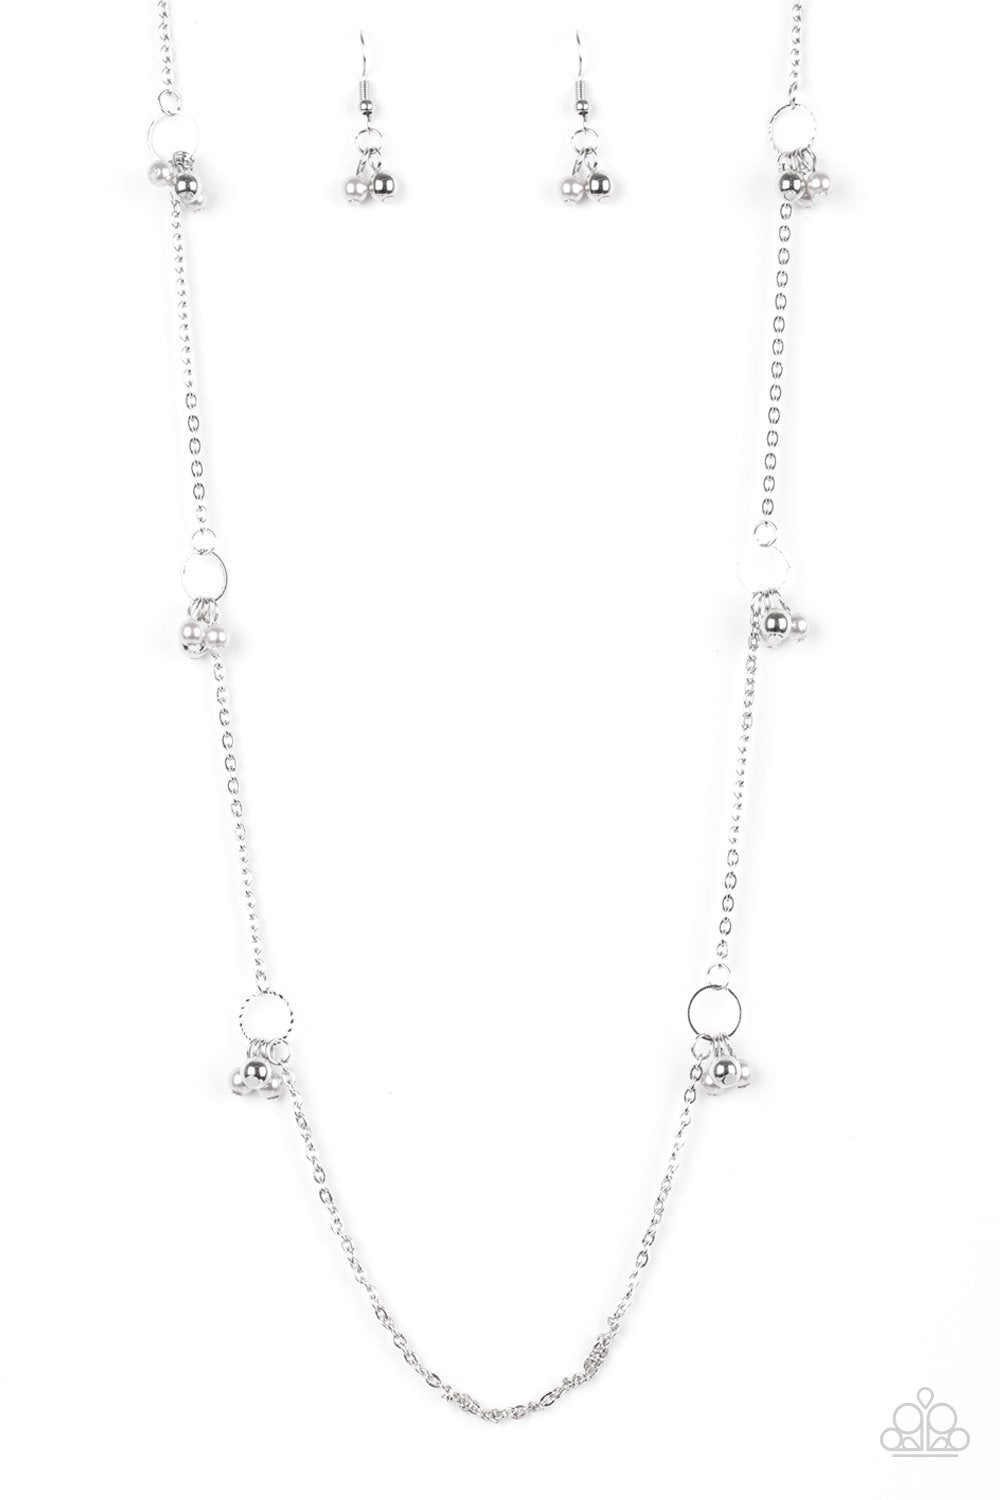 House Party Posh Silver Necklace - Paparazzi Accessories-CarasShop.com - $5 Jewelry by Cara Jewels